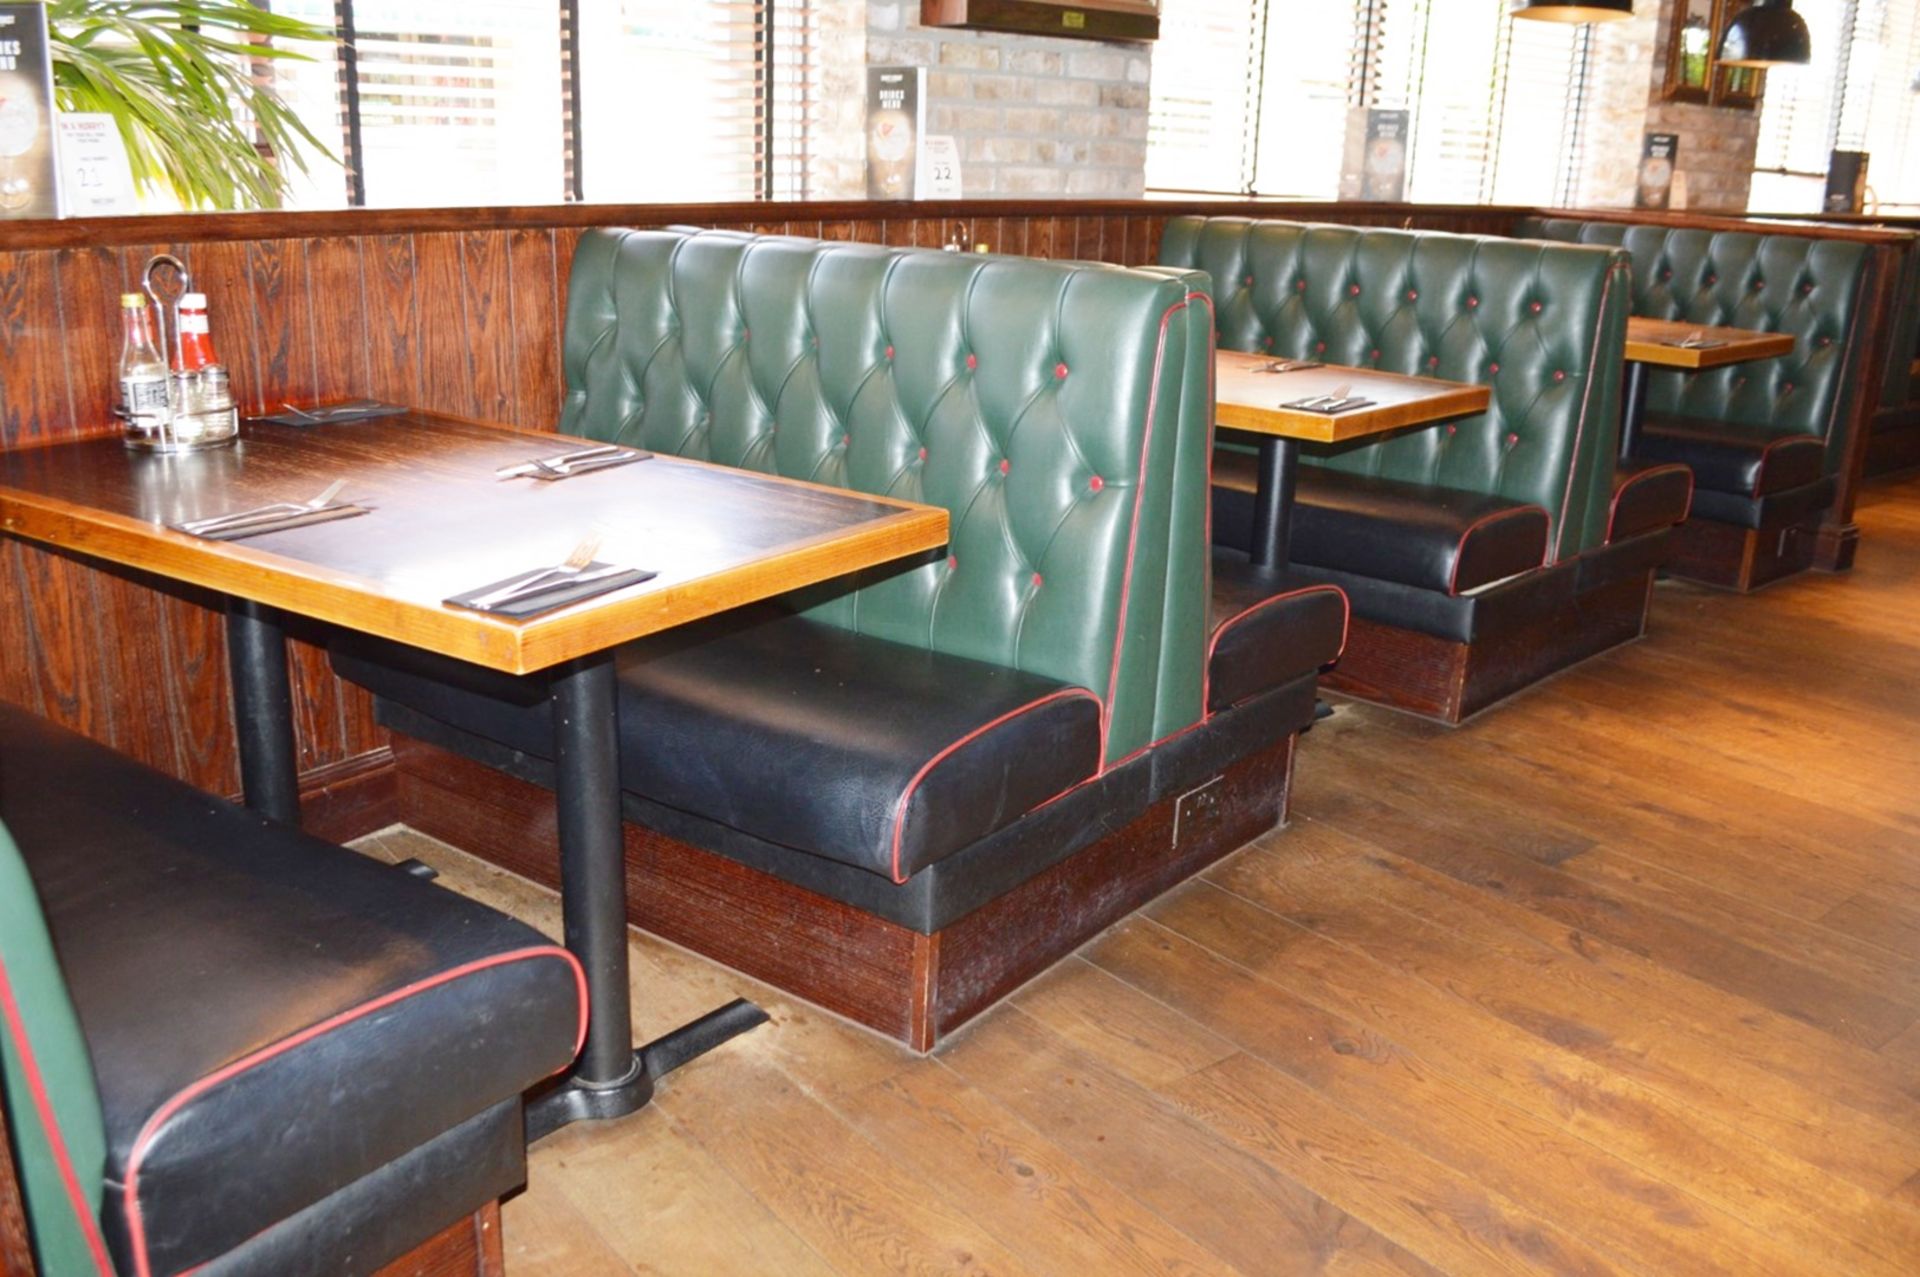 3 x Sections of Restaurant Booth Seating - Include 2 x Double End Seats and 1 x Double Back to